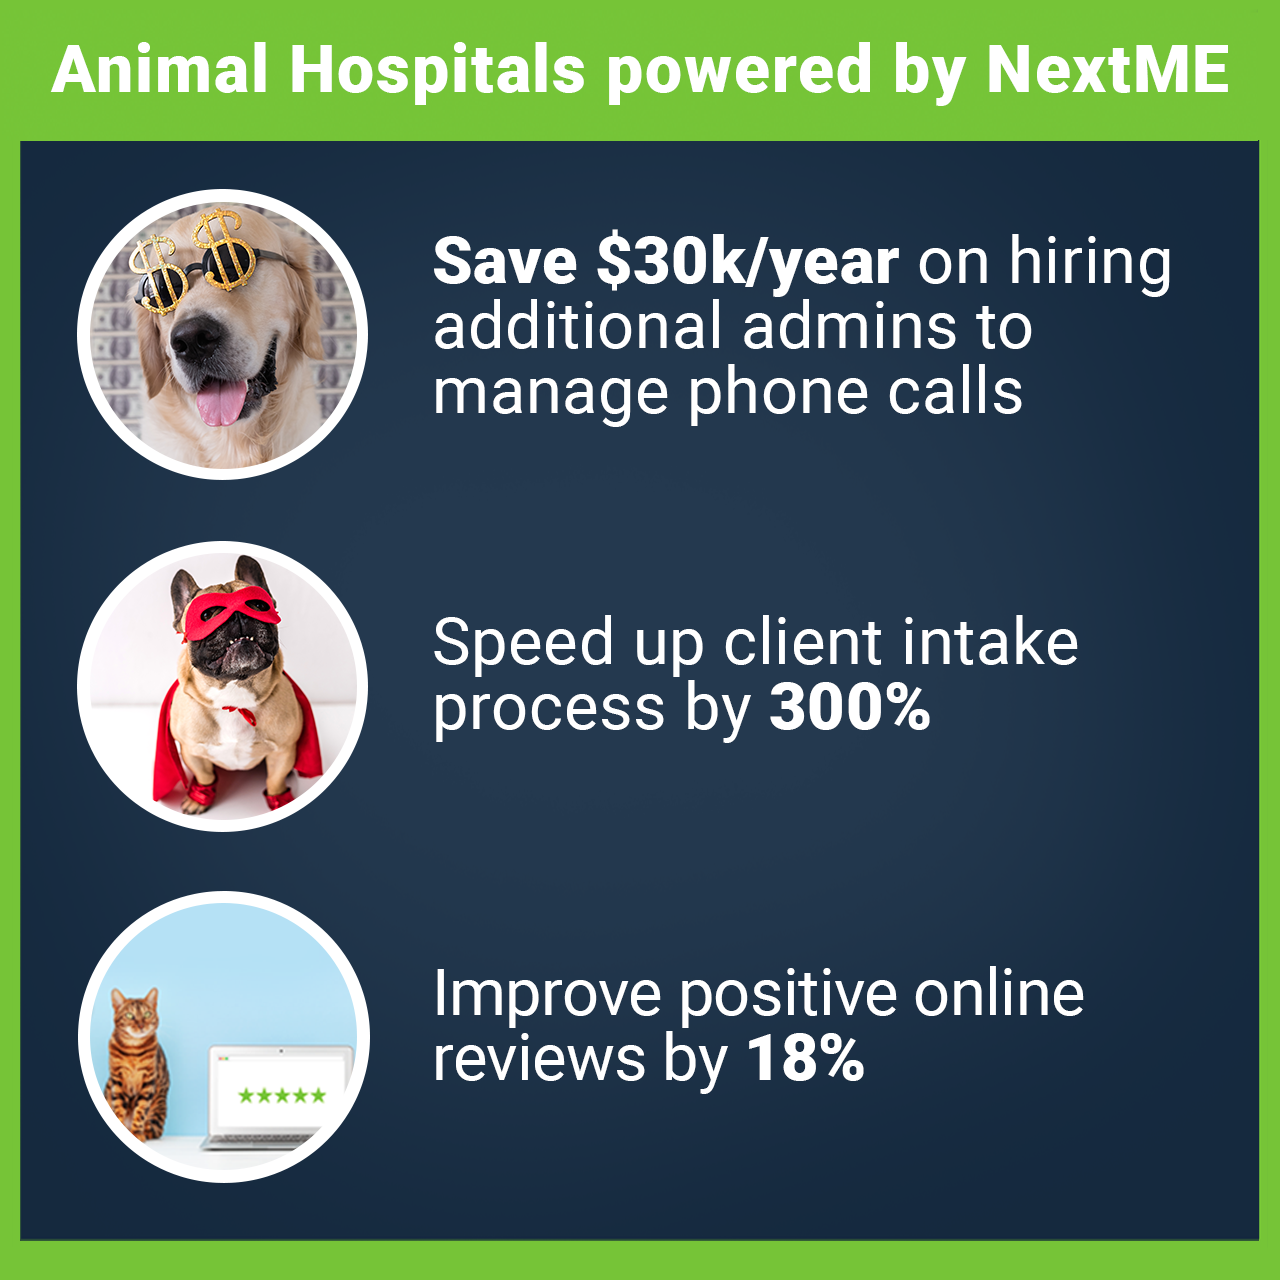 Waitlist App Helps Animal Hospitals with Surge in Demand - NextME